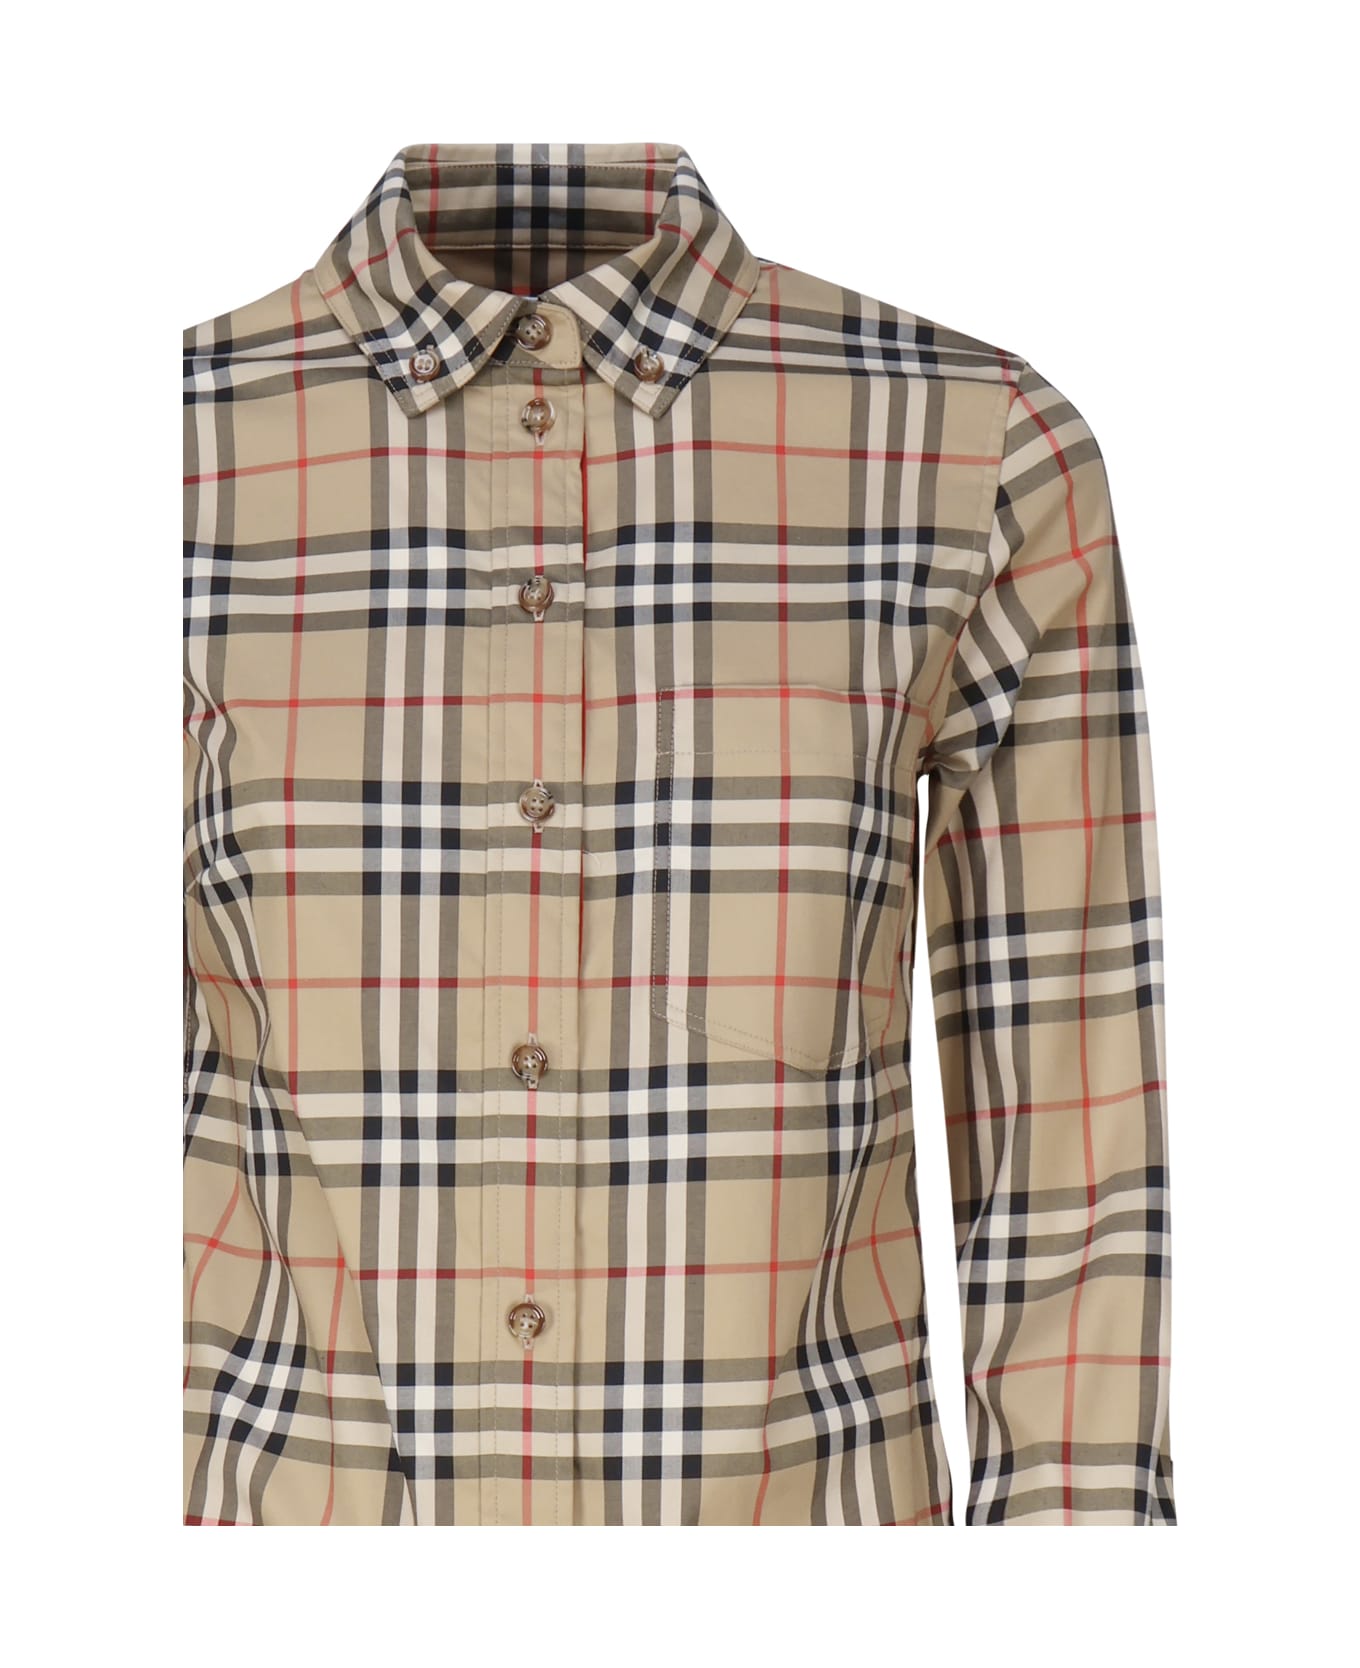 Burberry Shirt With Vintage Check Pattern - Beige シャツ